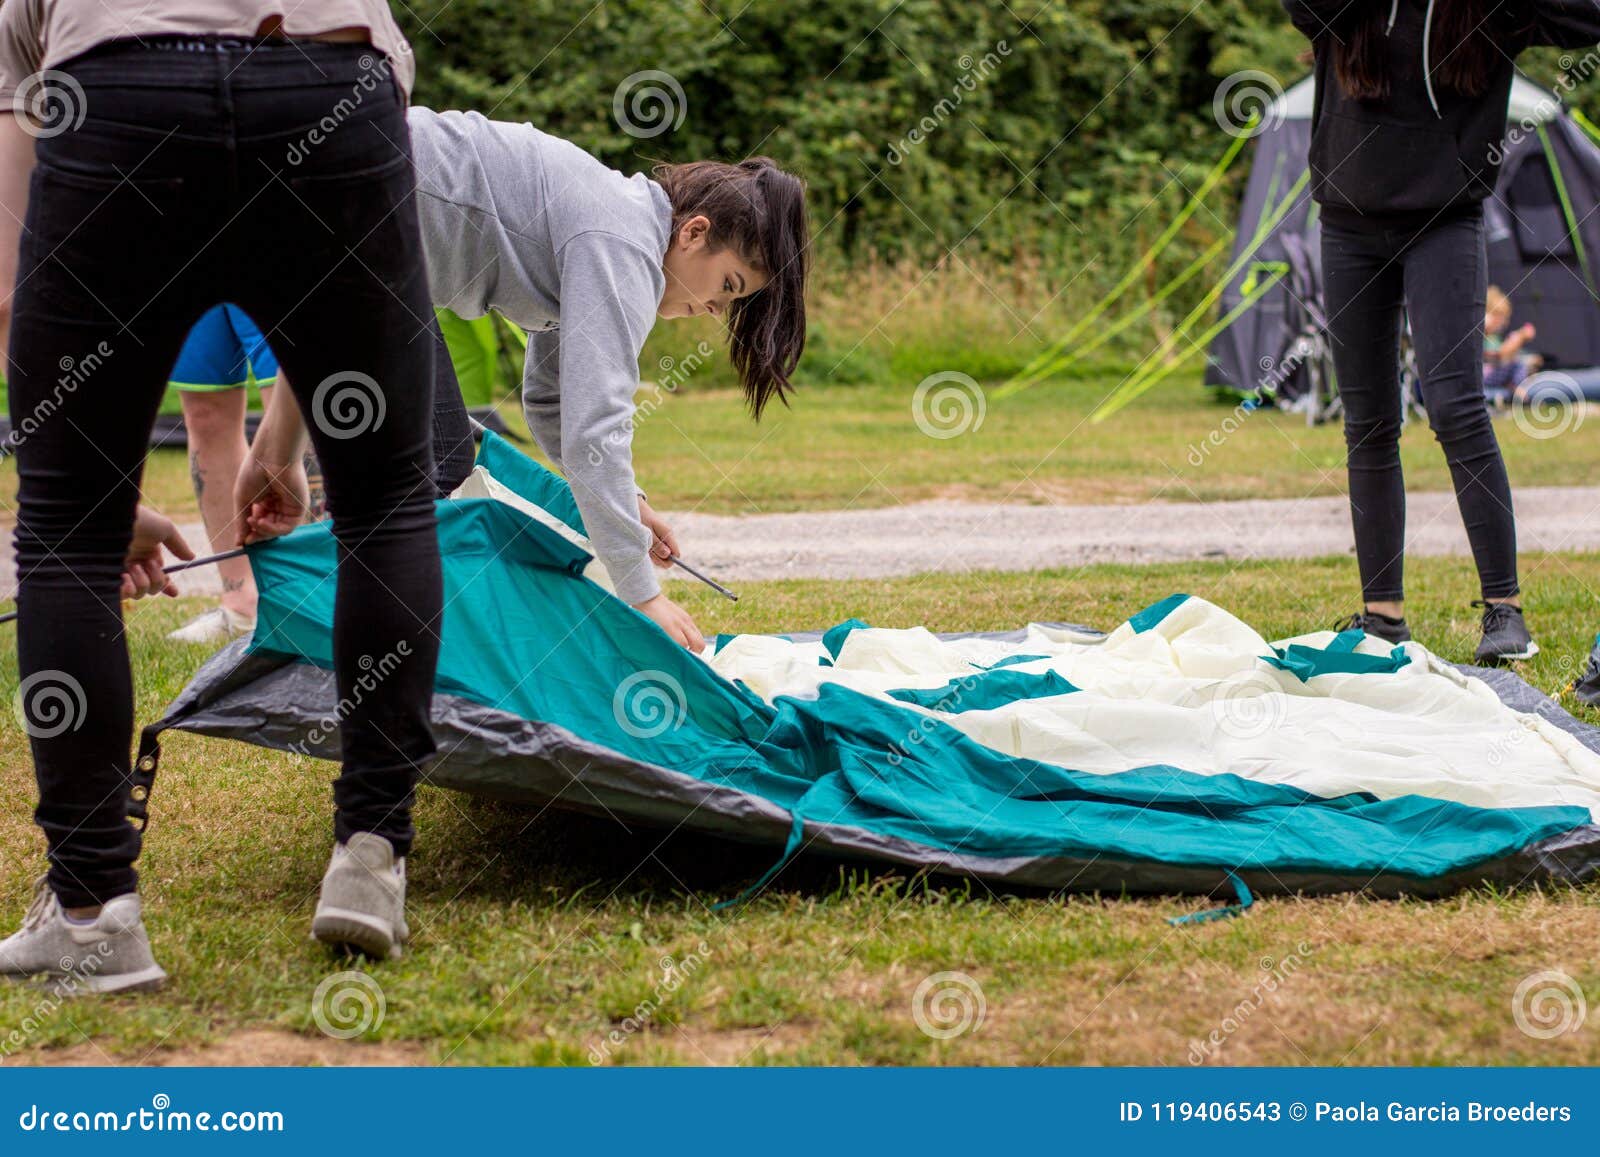 Putting Up Tent on Camping Trip Stock Image - Image of activities ...